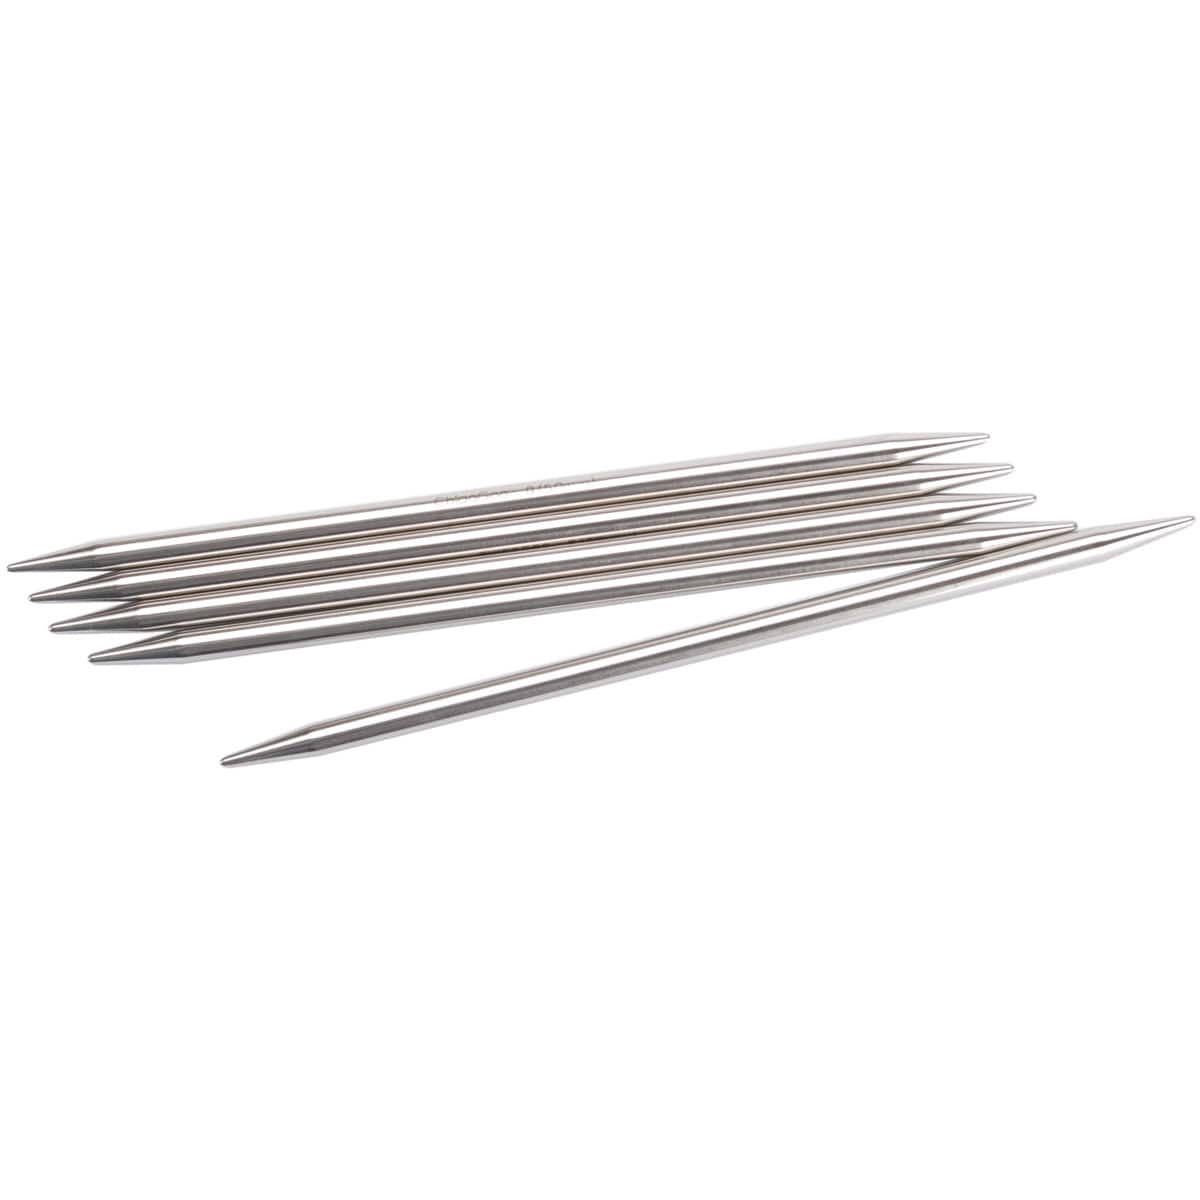 Double Pointed Knitting Needles Set 7.87, 55 PCS Stainless Steel